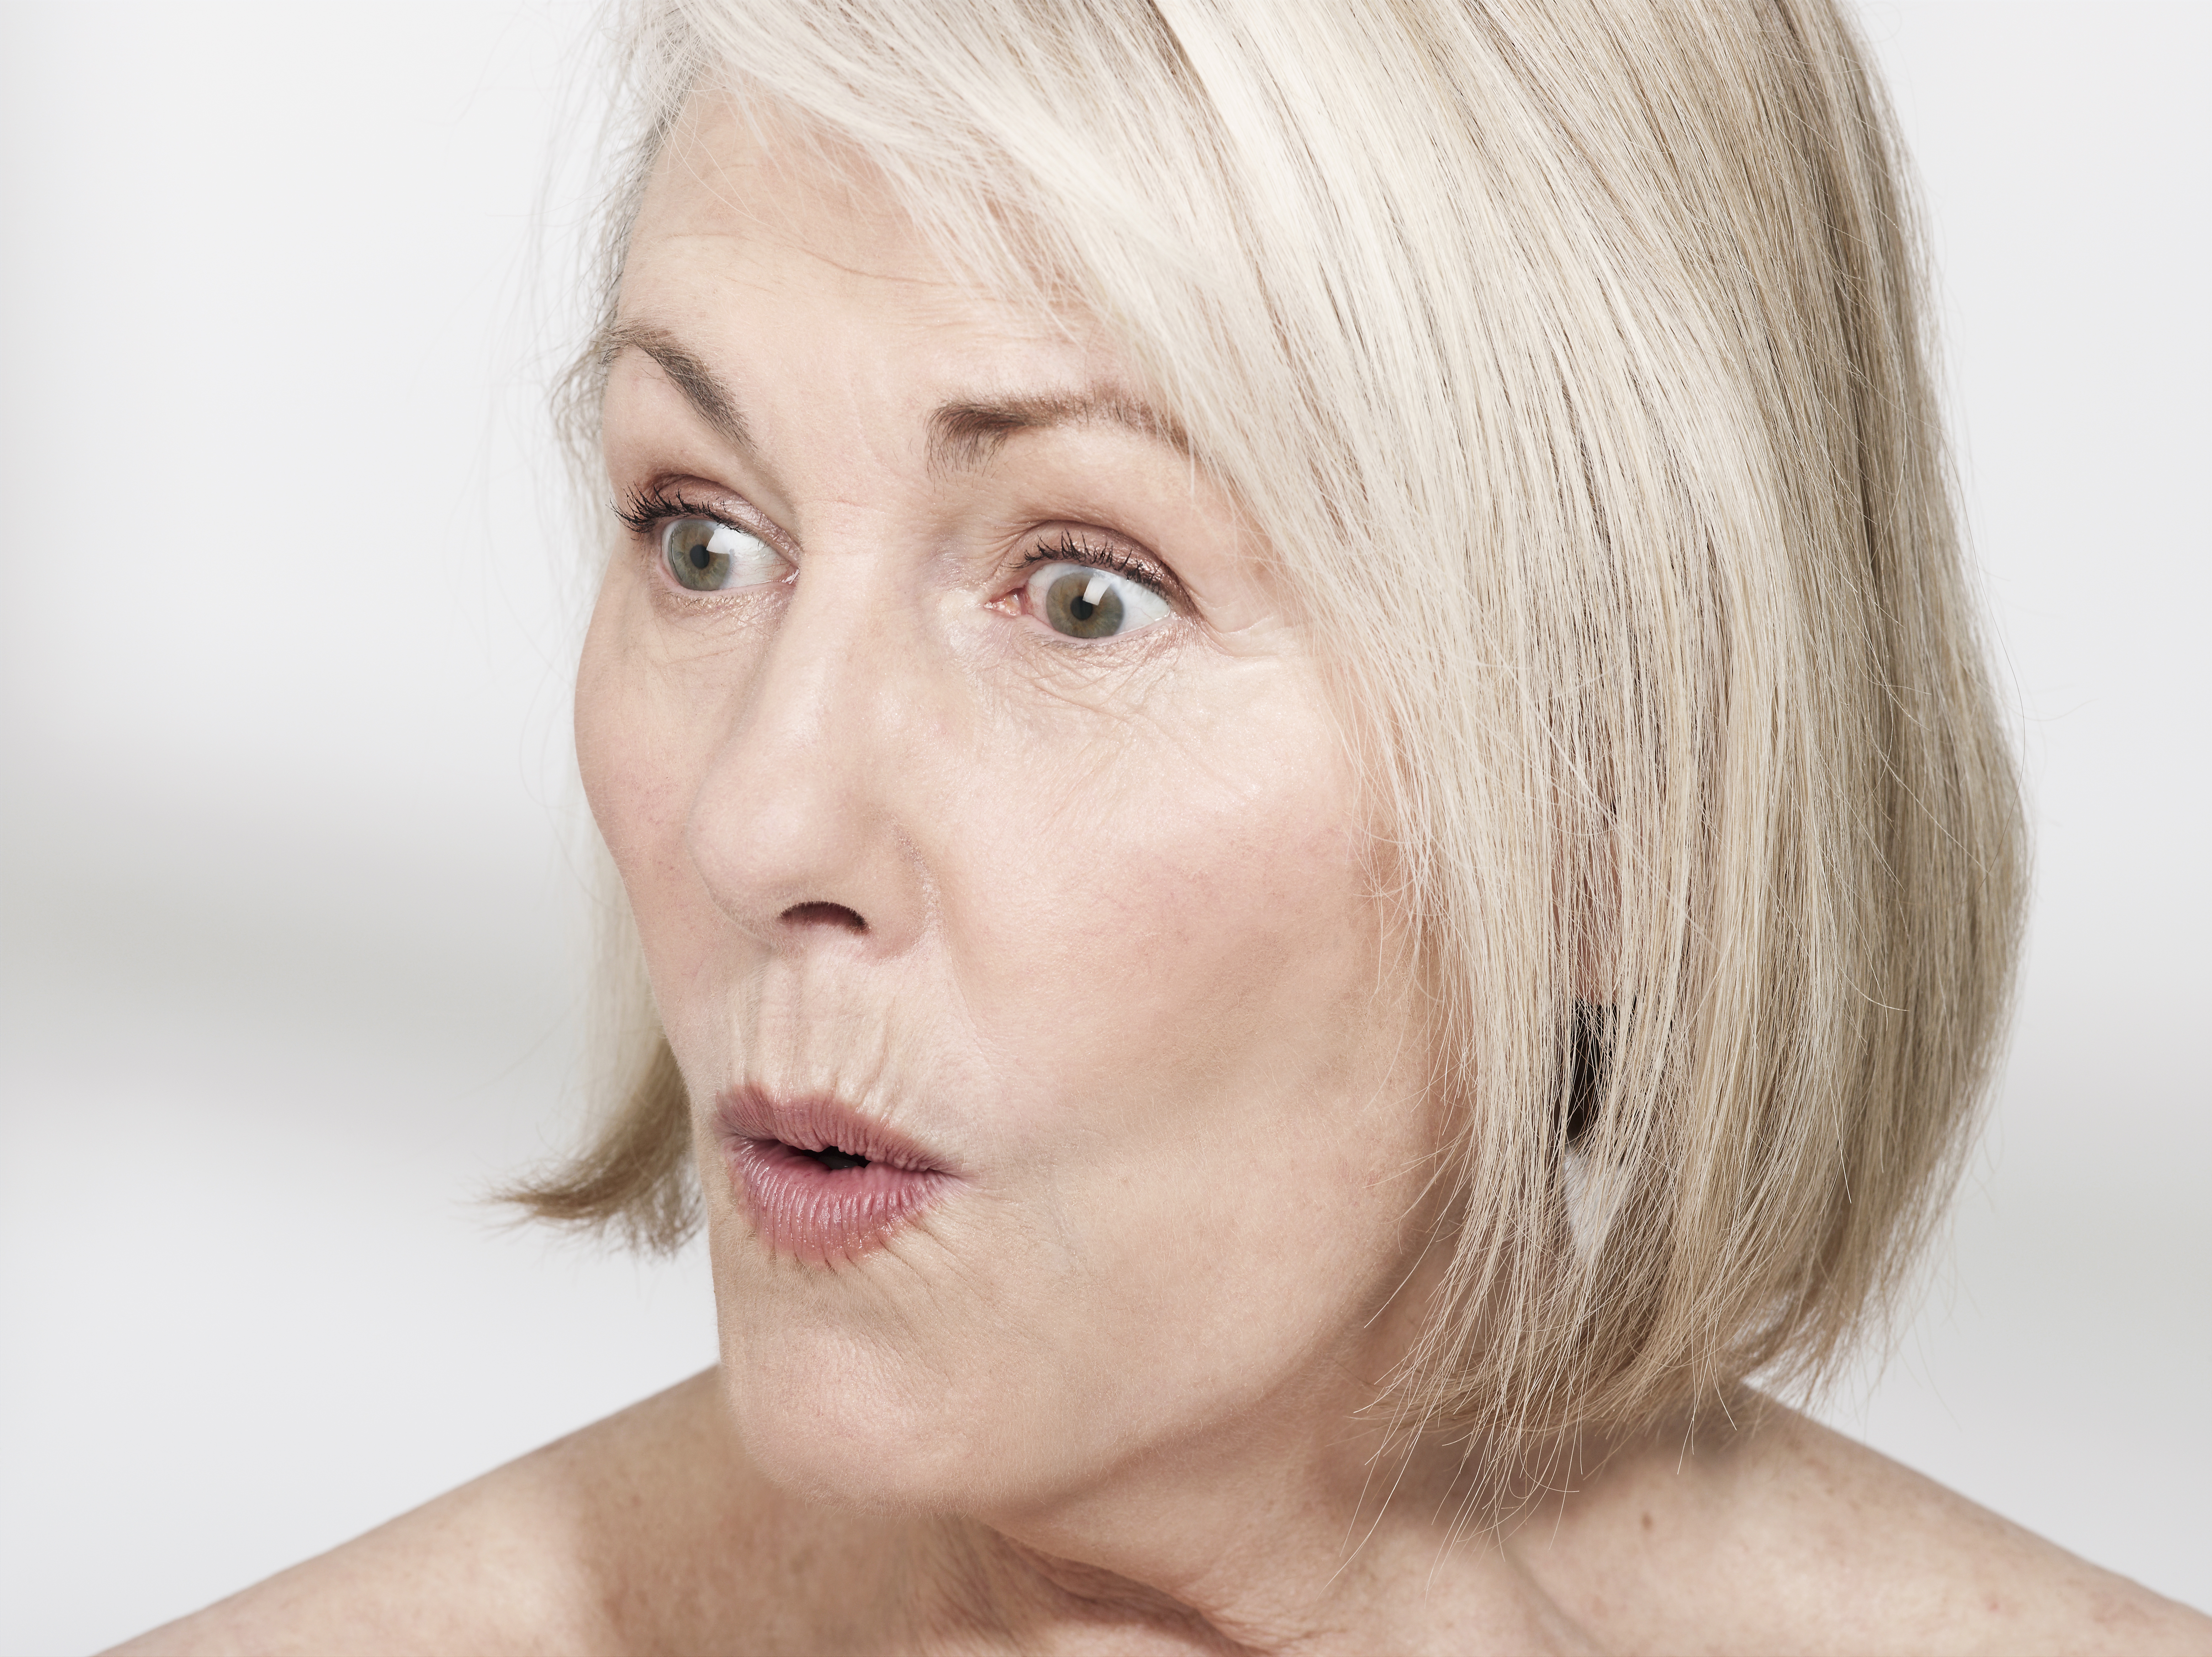 A close-up shot of a surprised senior woman | Source: Getty Images